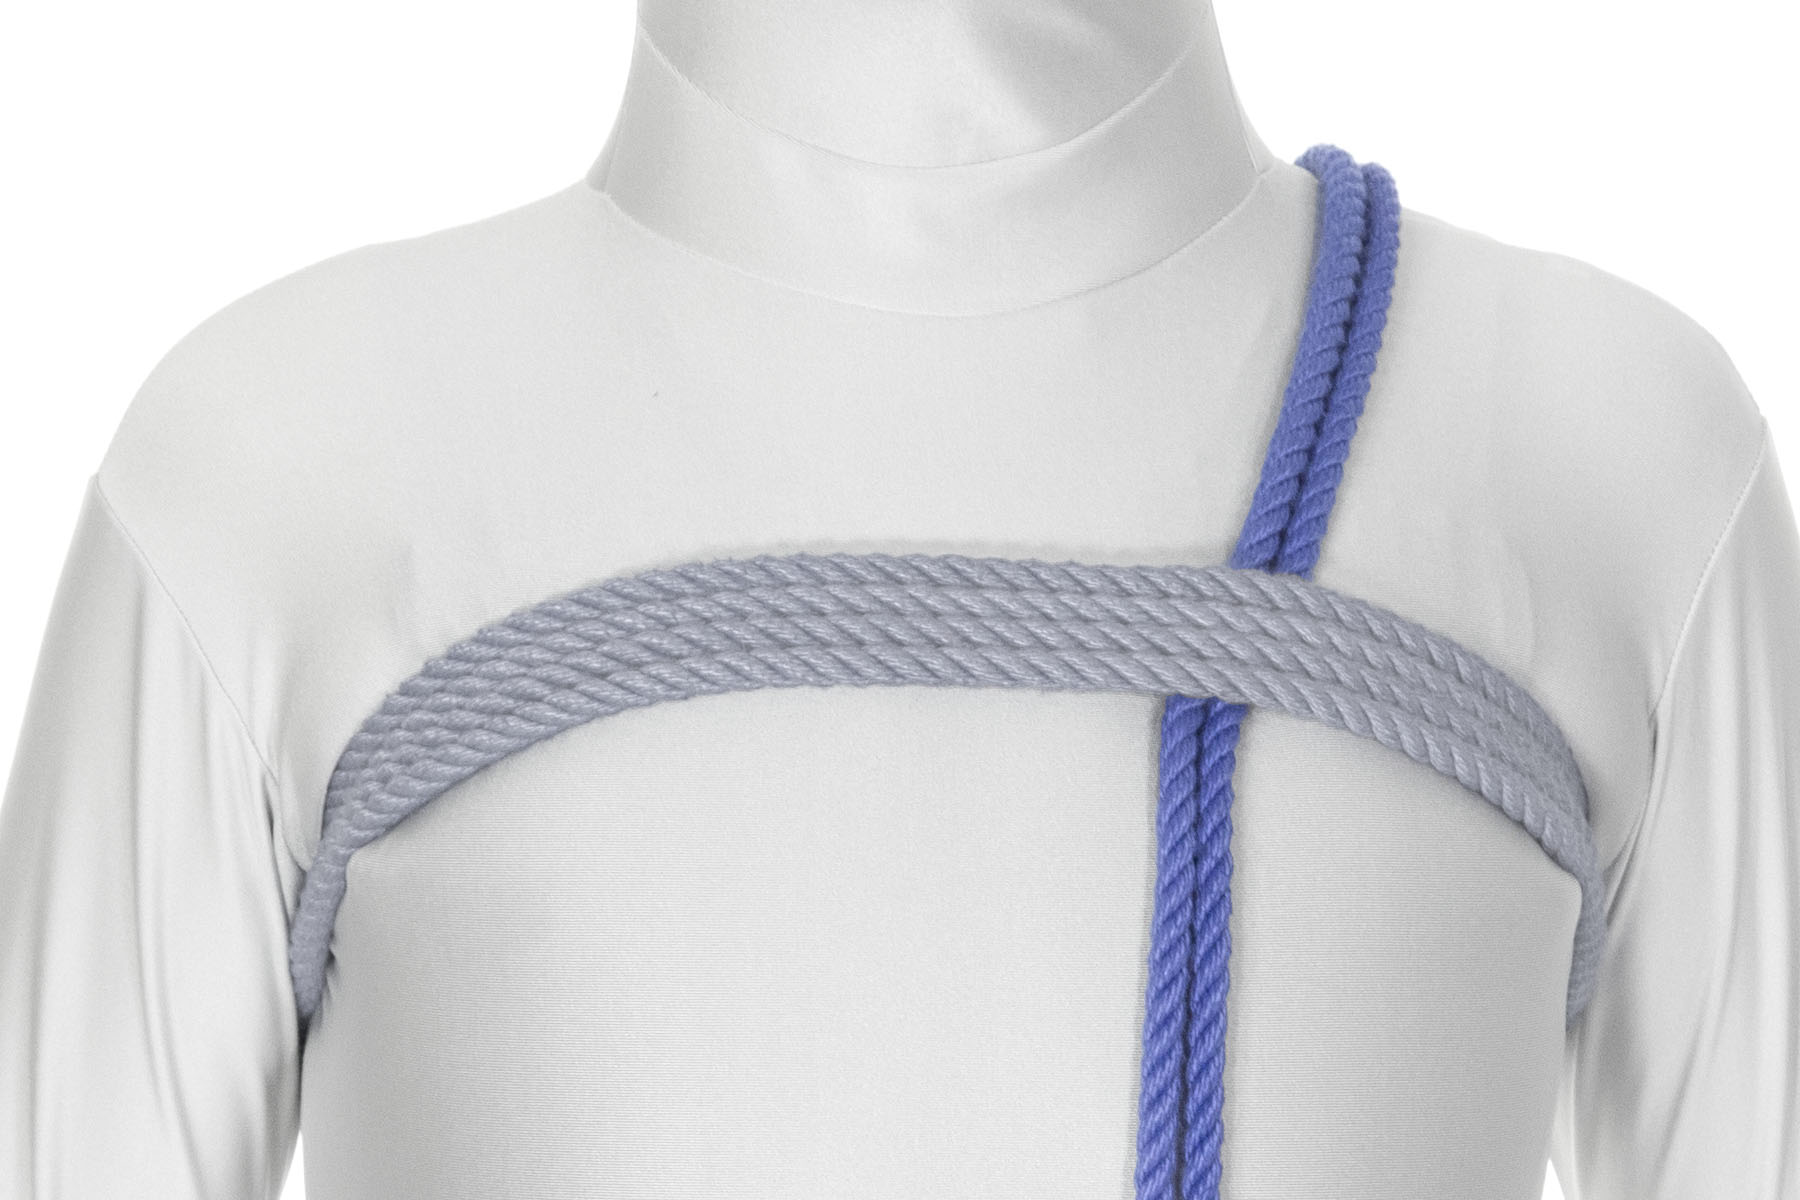 We are looking from the front as the rope comes over the left shoulder and straight down the front of the chest, crossing under the chest wraps.